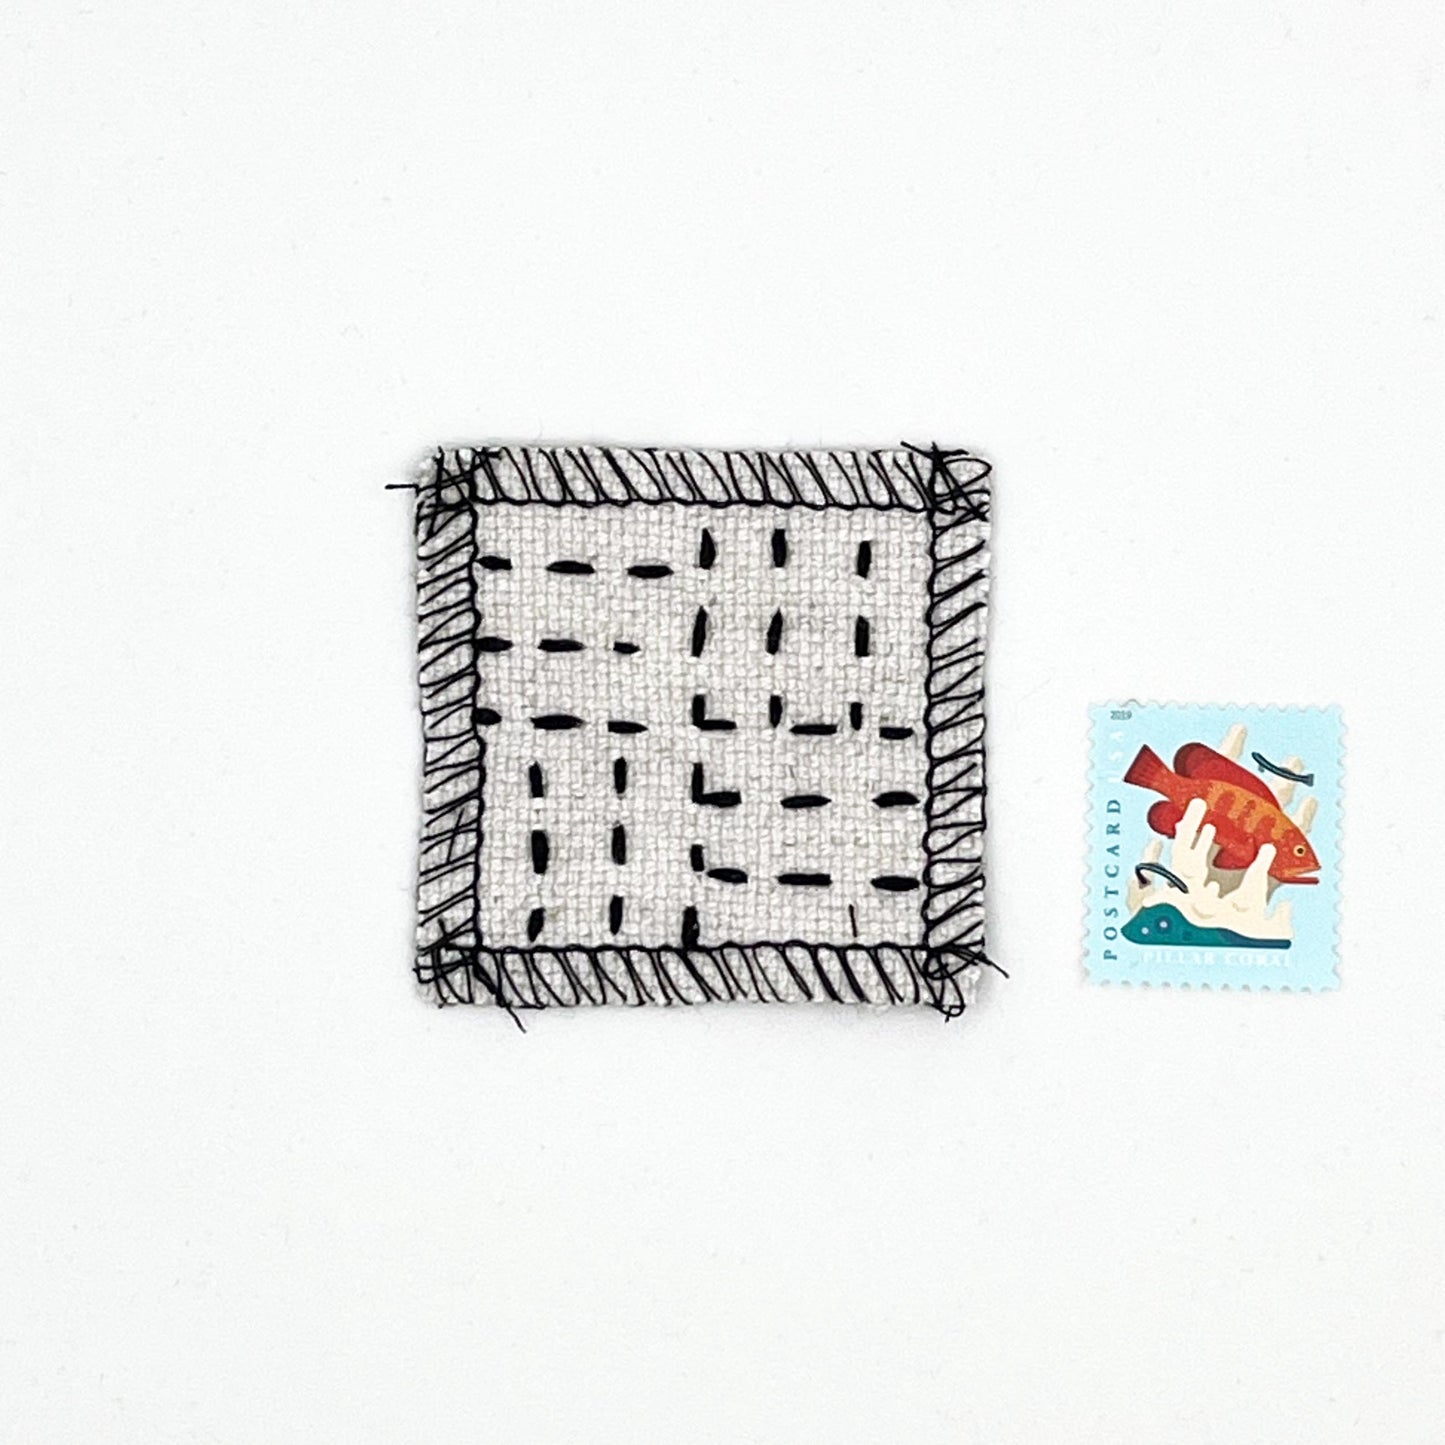 square natural colored patch with stitching in black of a basketweave pattern, next to a stamp for size comparison